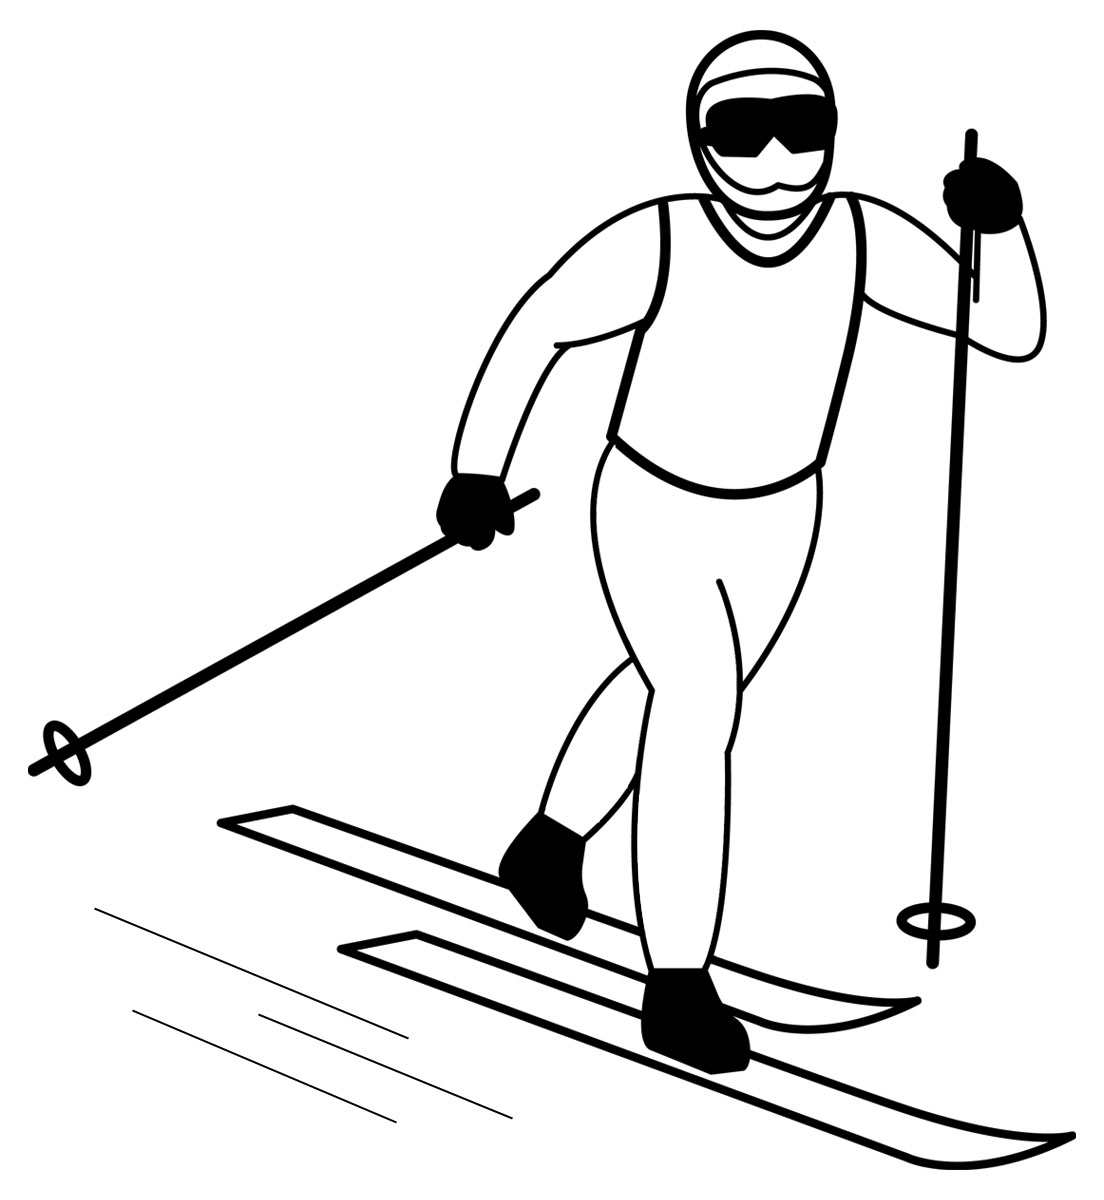 Skiing Clipart 